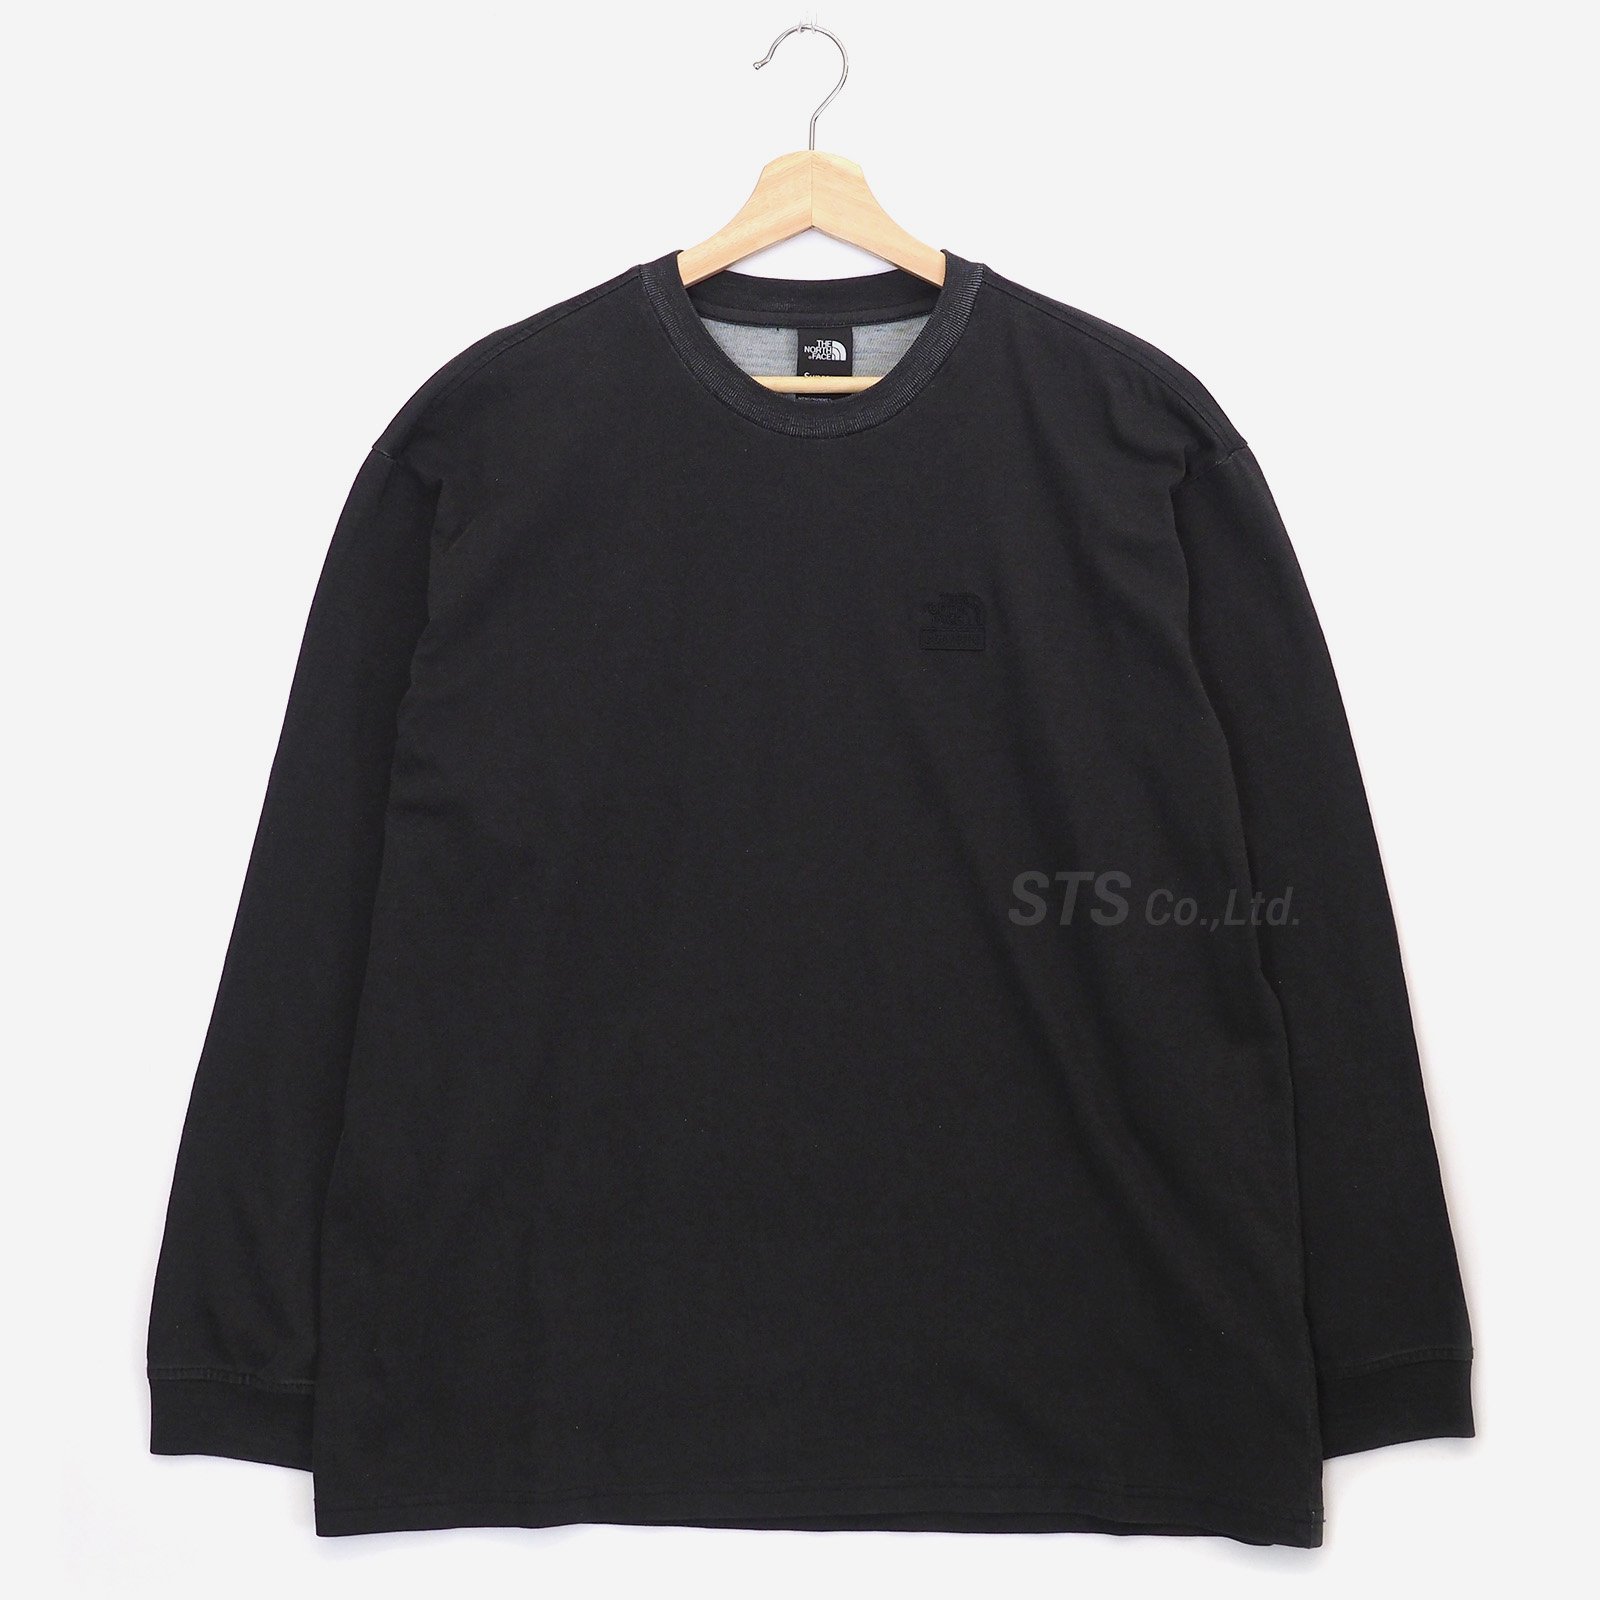 supreme  THE NORTH FACE T-shirt L